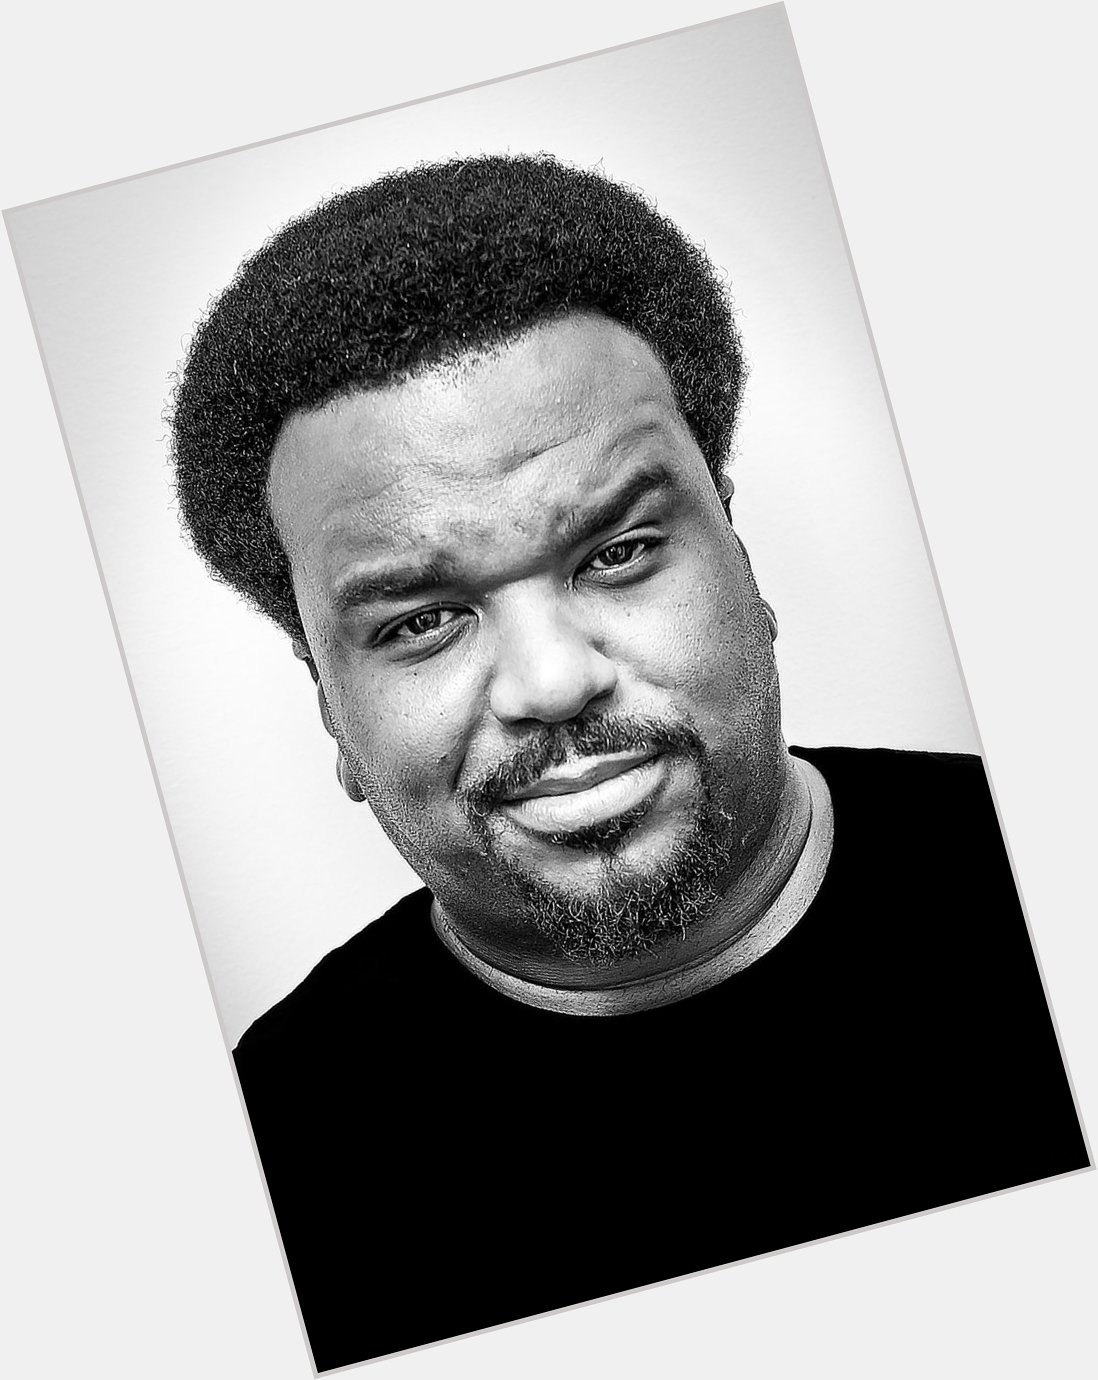 Happy Birthday Craig Robinson!
The Walker Collective - A Law Firm For Creatives
 